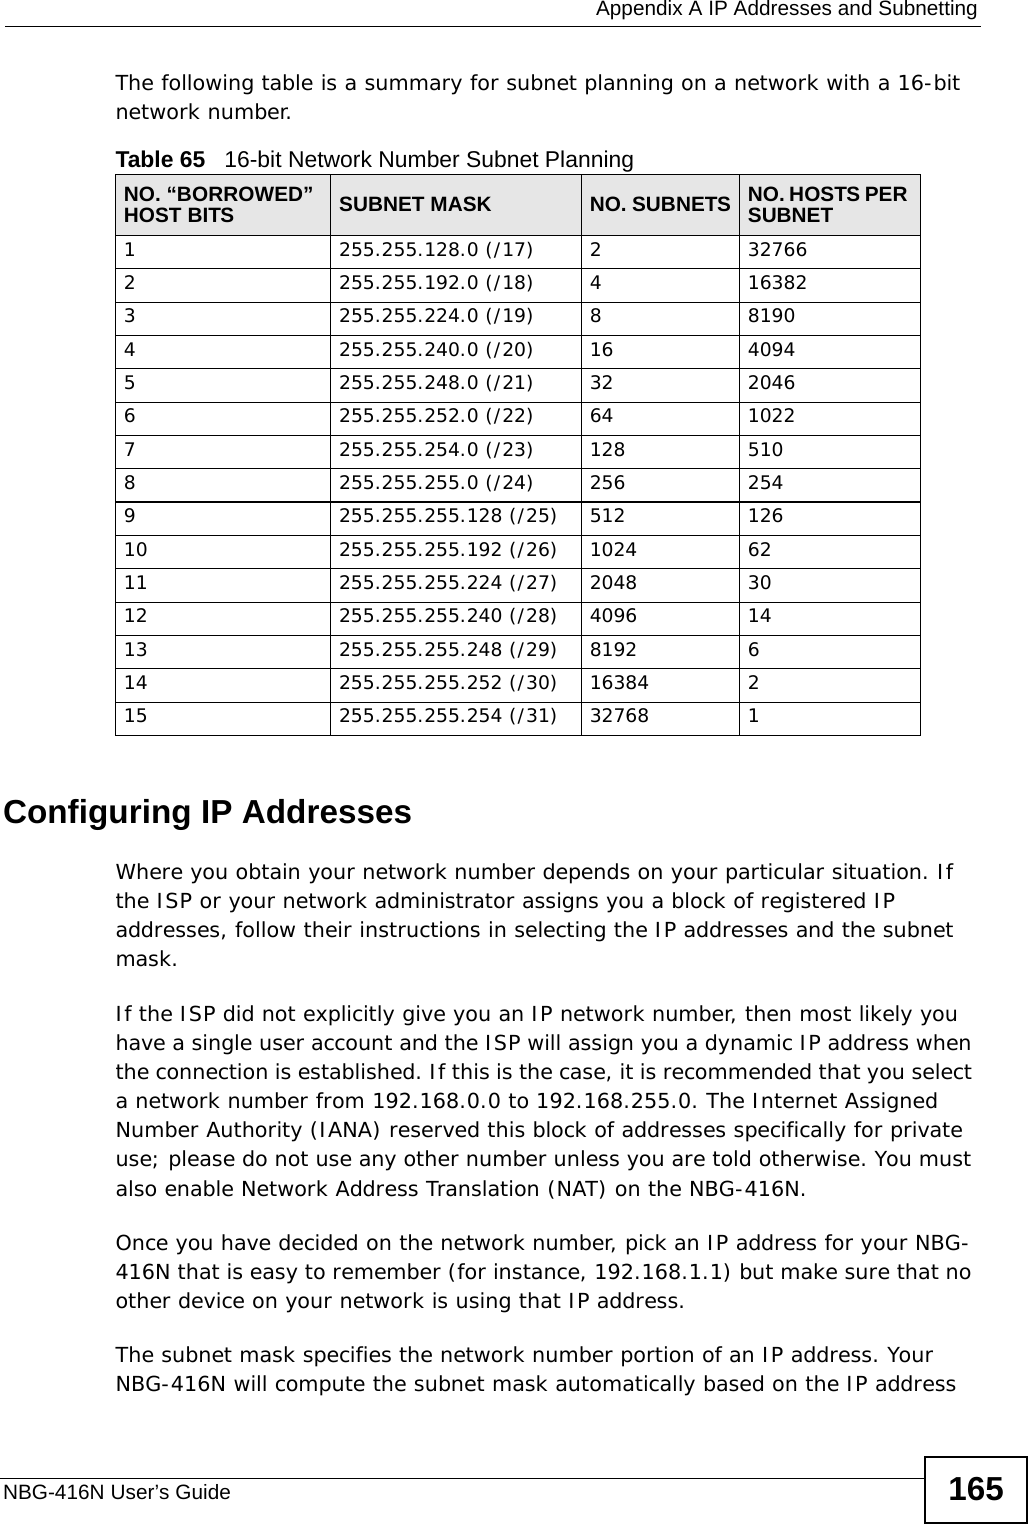  Appendix A IP Addresses and SubnettingNBG-416N User’s Guide 165The following table is a summary for subnet planning on a network with a 16-bit network number. Configuring IP AddressesWhere you obtain your network number depends on your particular situation. If the ISP or your network administrator assigns you a block of registered IP addresses, follow their instructions in selecting the IP addresses and the subnet mask.If the ISP did not explicitly give you an IP network number, then most likely you have a single user account and the ISP will assign you a dynamic IP address when the connection is established. If this is the case, it is recommended that you select a network number from 192.168.0.0 to 192.168.255.0. The Internet Assigned Number Authority (IANA) reserved this block of addresses specifically for private use; please do not use any other number unless you are told otherwise. You must also enable Network Address Translation (NAT) on the NBG-416N. Once you have decided on the network number, pick an IP address for your NBG-416N that is easy to remember (for instance, 192.168.1.1) but make sure that no other device on your network is using that IP address.The subnet mask specifies the network number portion of an IP address. Your NBG-416N will compute the subnet mask automatically based on the IP address Table 65   16-bit Network Number Subnet PlanningNO. “BORROWED” HOST BITS SUBNET MASK NO. SUBNETS NO. HOSTS PER SUBNET1255.255.128.0 (/17) 2327662255.255.192.0 (/18) 4163823255.255.224.0 (/19) 881904255.255.240.0 (/20) 16 40945255.255.248.0 (/21) 32 20466255.255.252.0 (/22) 64 10227255.255.254.0 (/23) 128 5108255.255.255.0 (/24) 256 2549255.255.255.128 (/25) 512 12610 255.255.255.192 (/26) 1024 6211 255.255.255.224 (/27) 2048 3012 255.255.255.240 (/28) 4096 1413 255.255.255.248 (/29) 8192 614 255.255.255.252 (/30) 16384 215 255.255.255.254 (/31) 32768 1